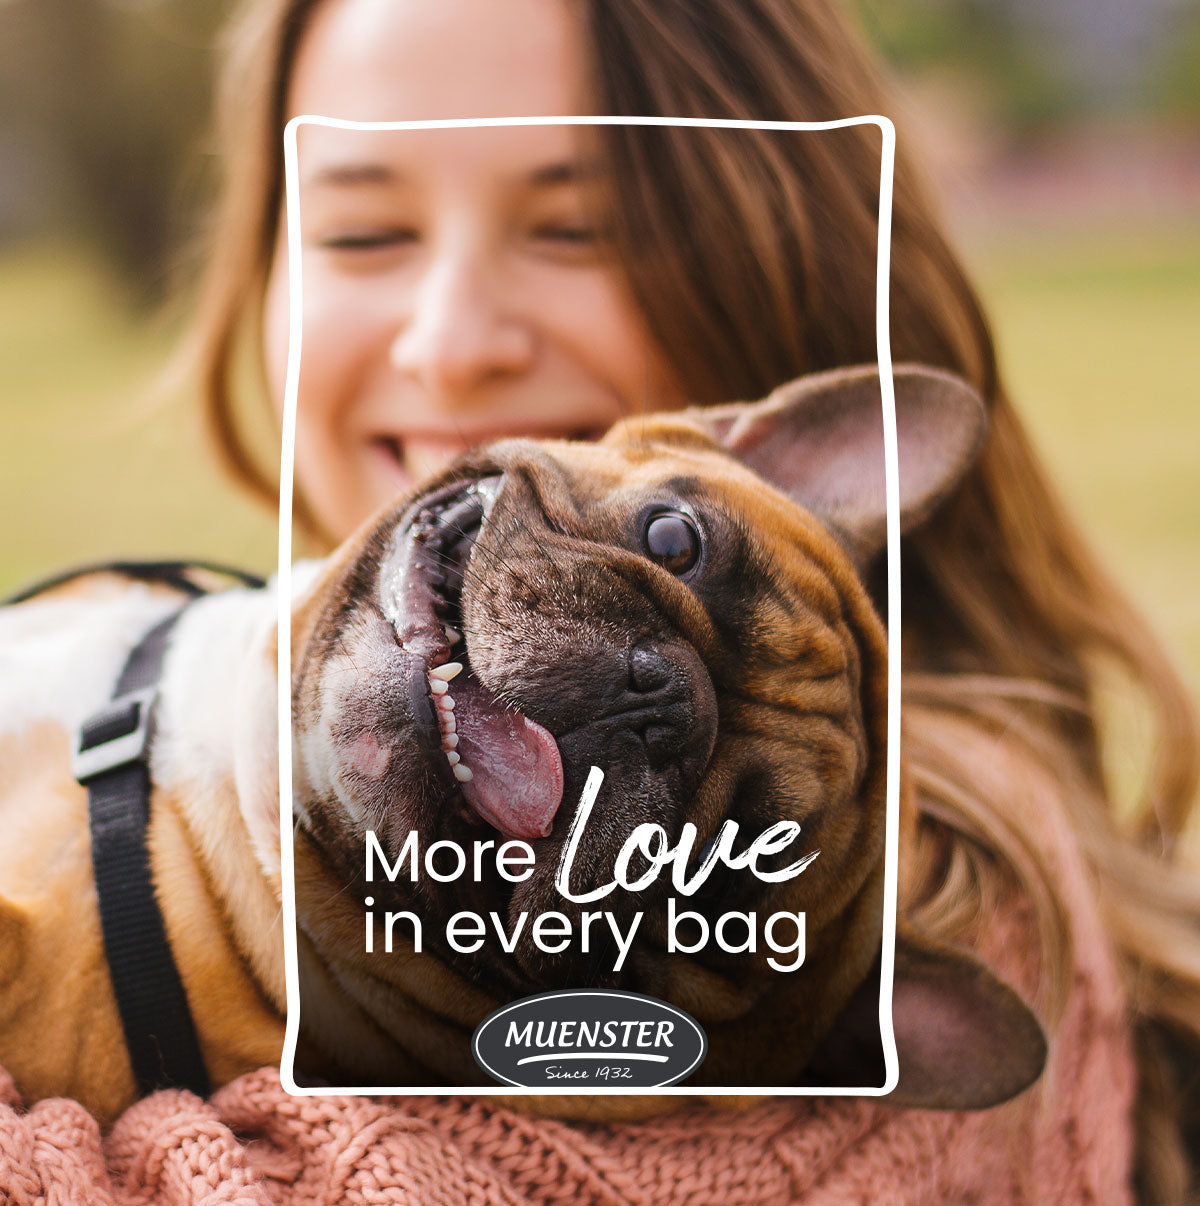 More Love in every bag